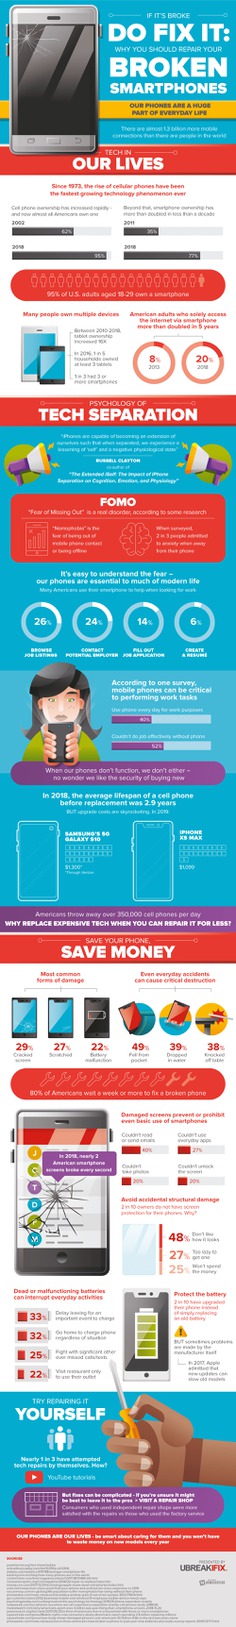 Infographic: Why You Should Repair Your Broken Smartphone